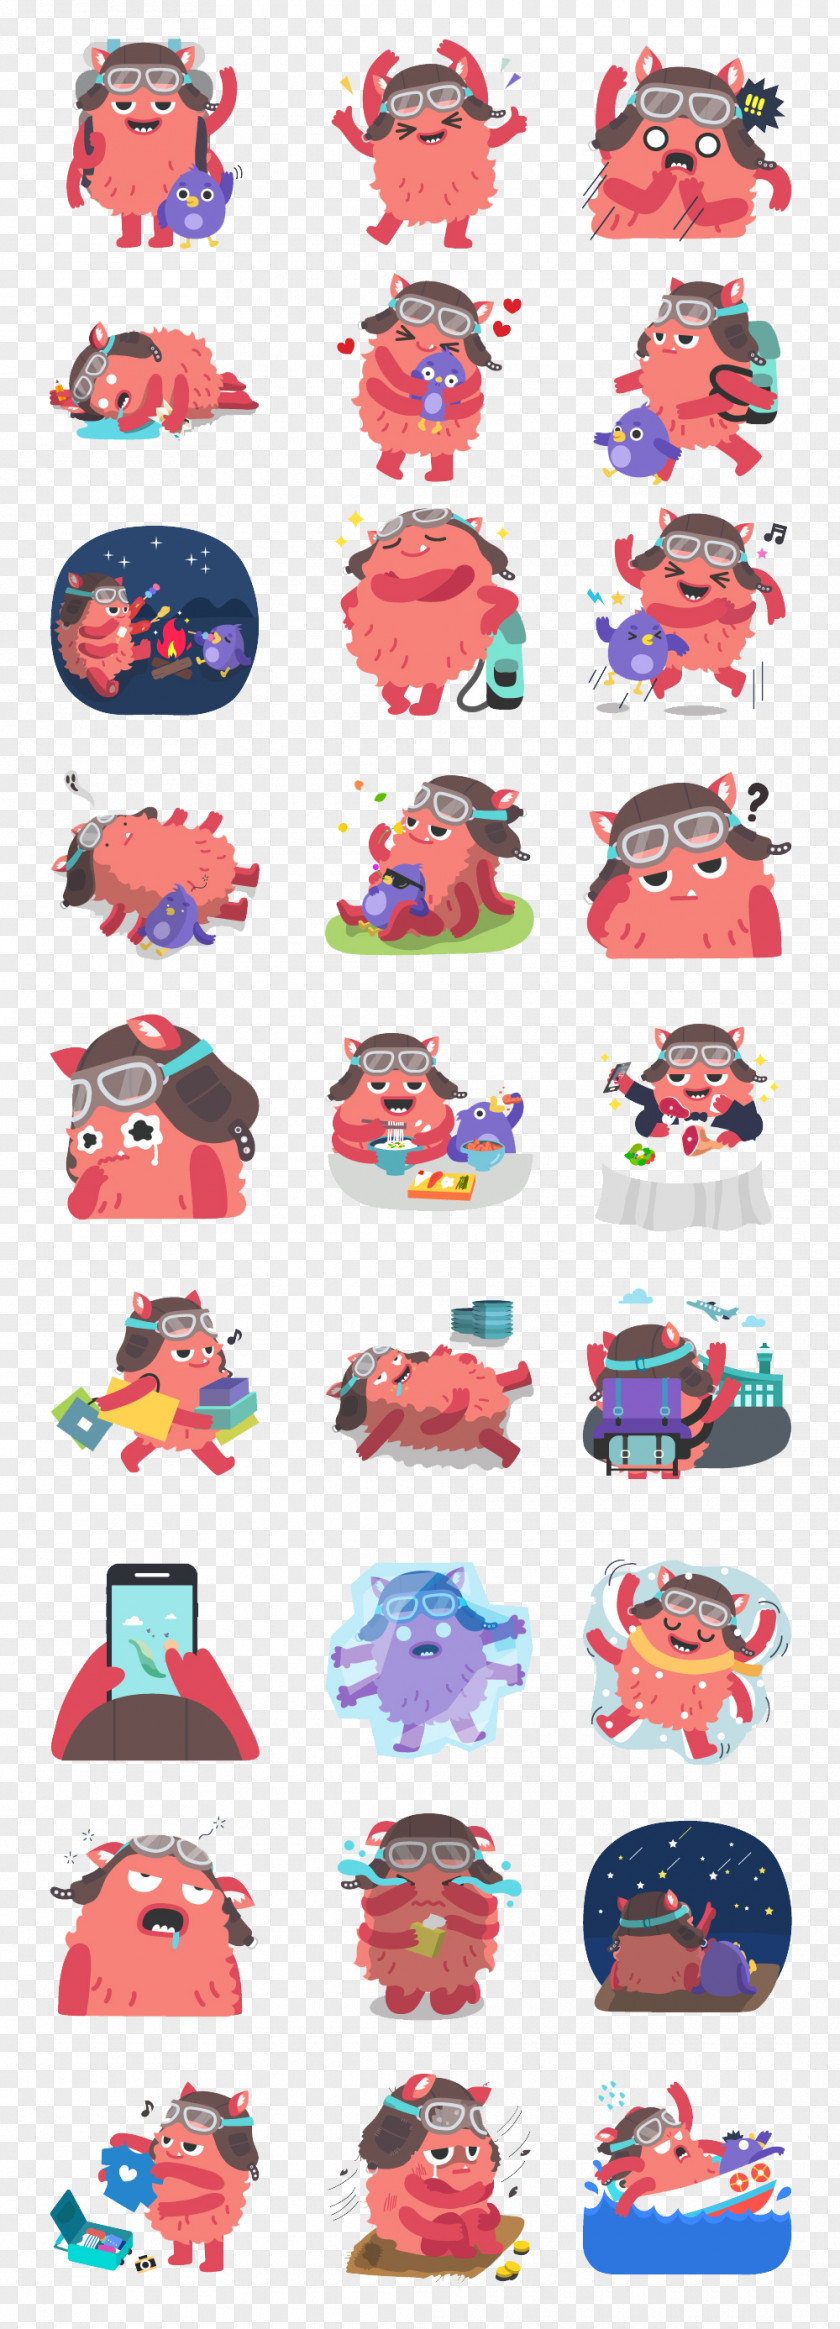 Cartoon Monster Collection Illustration PNG